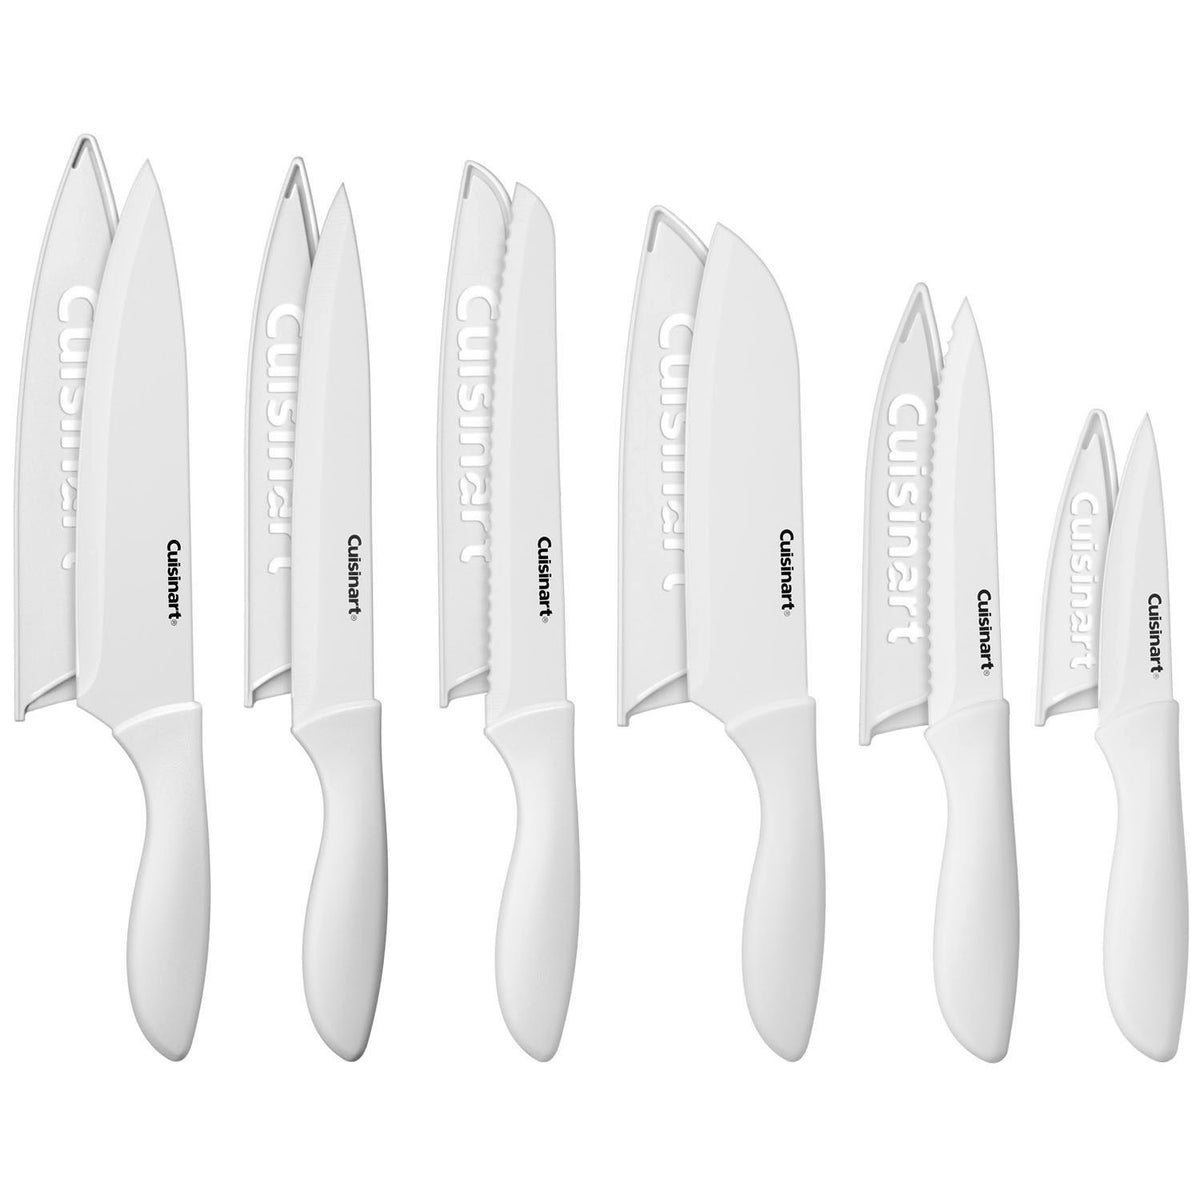 Cuisinart Ceramic Coated Knife Set with Blade Guards, Grey (6 knives and 6 knife  covers) 